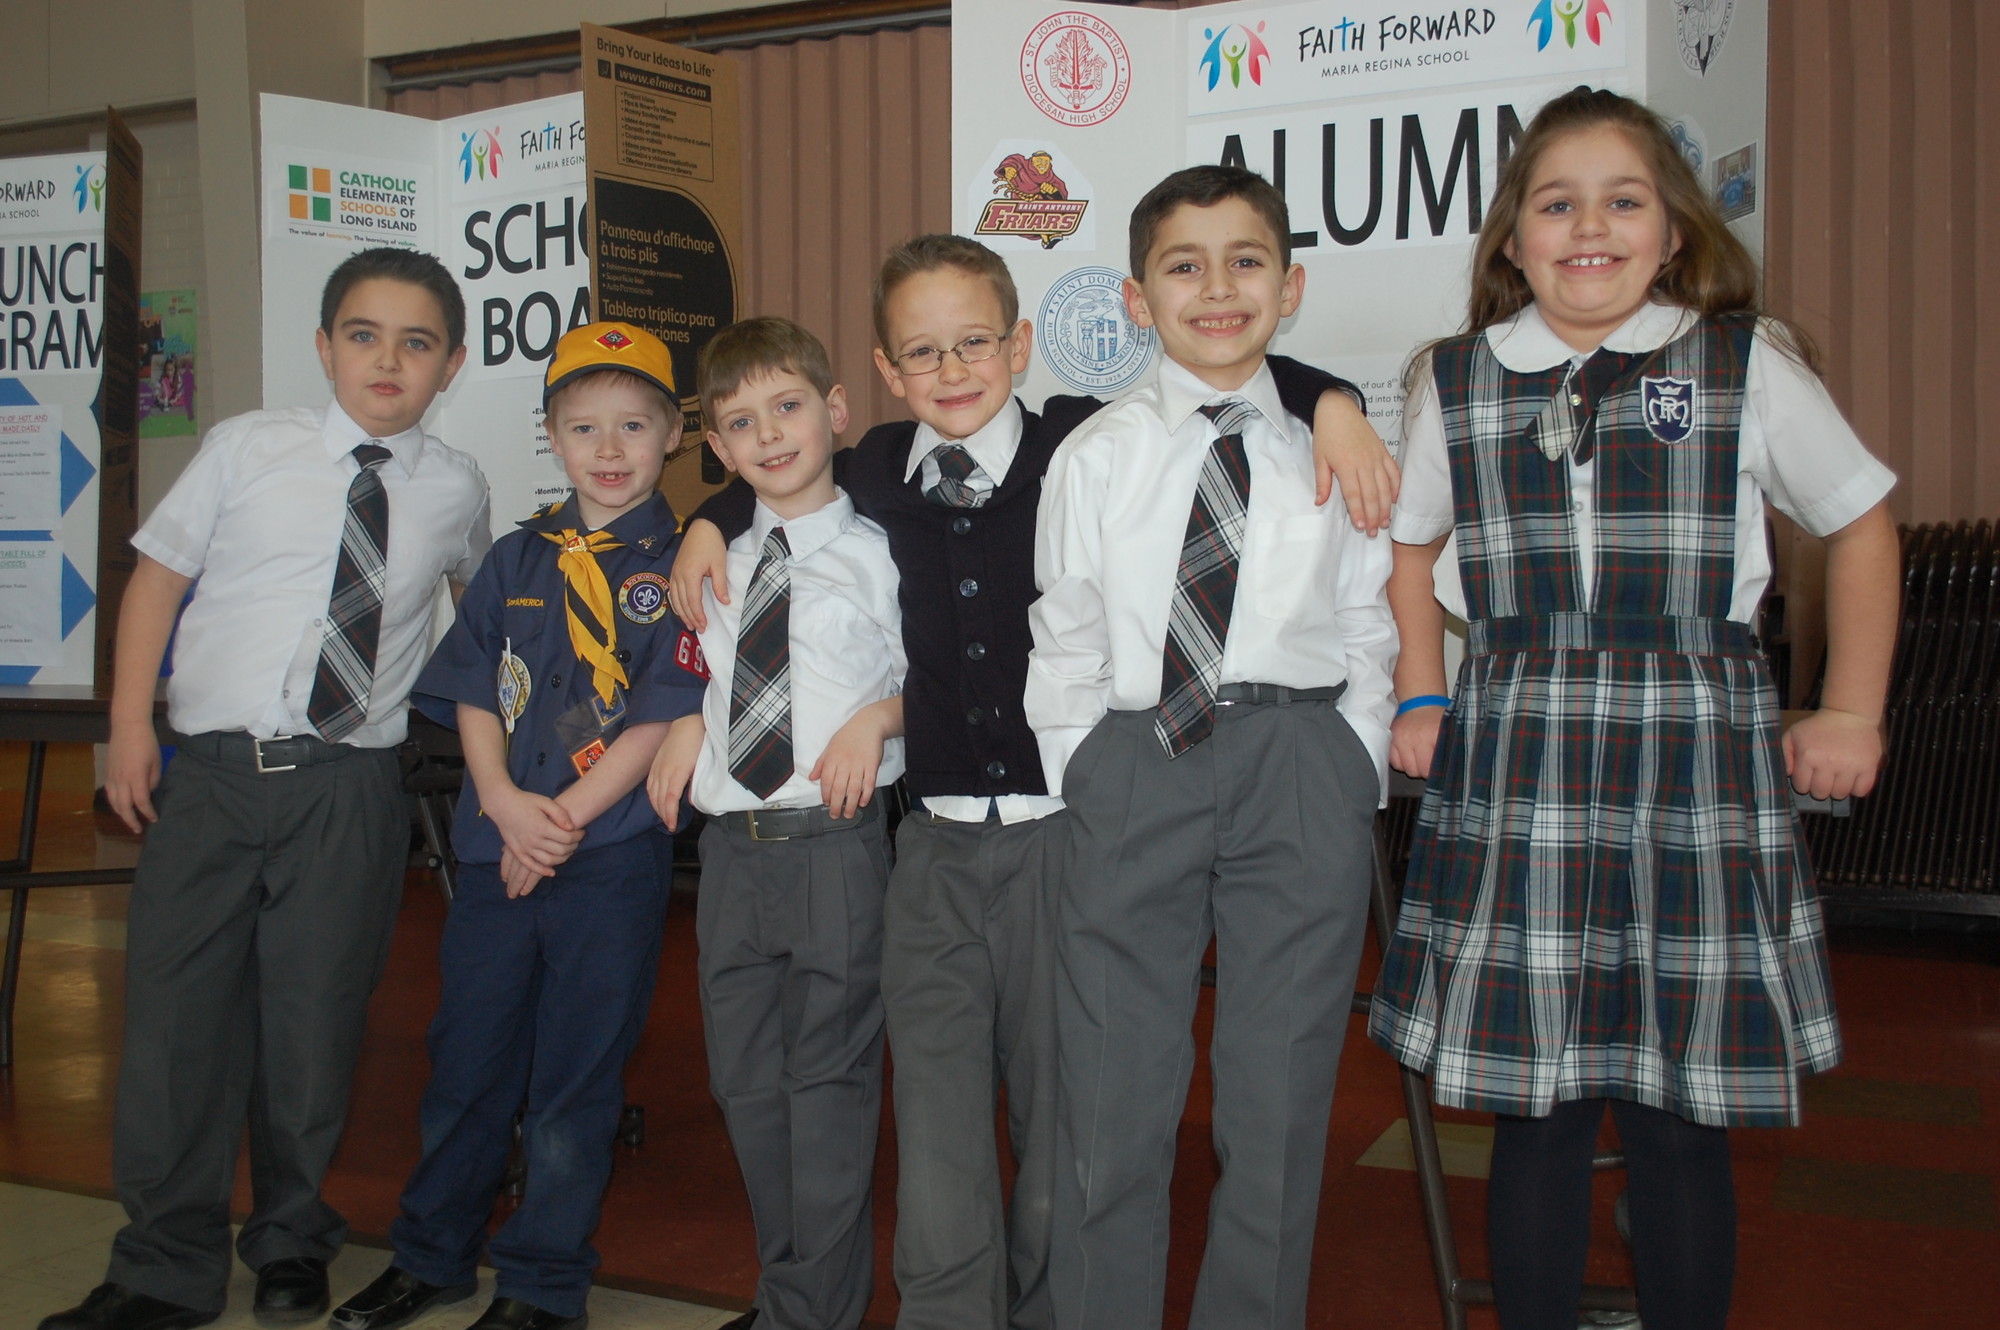 Students from Maria Regina School were on hand for the open house on Jan. 25.